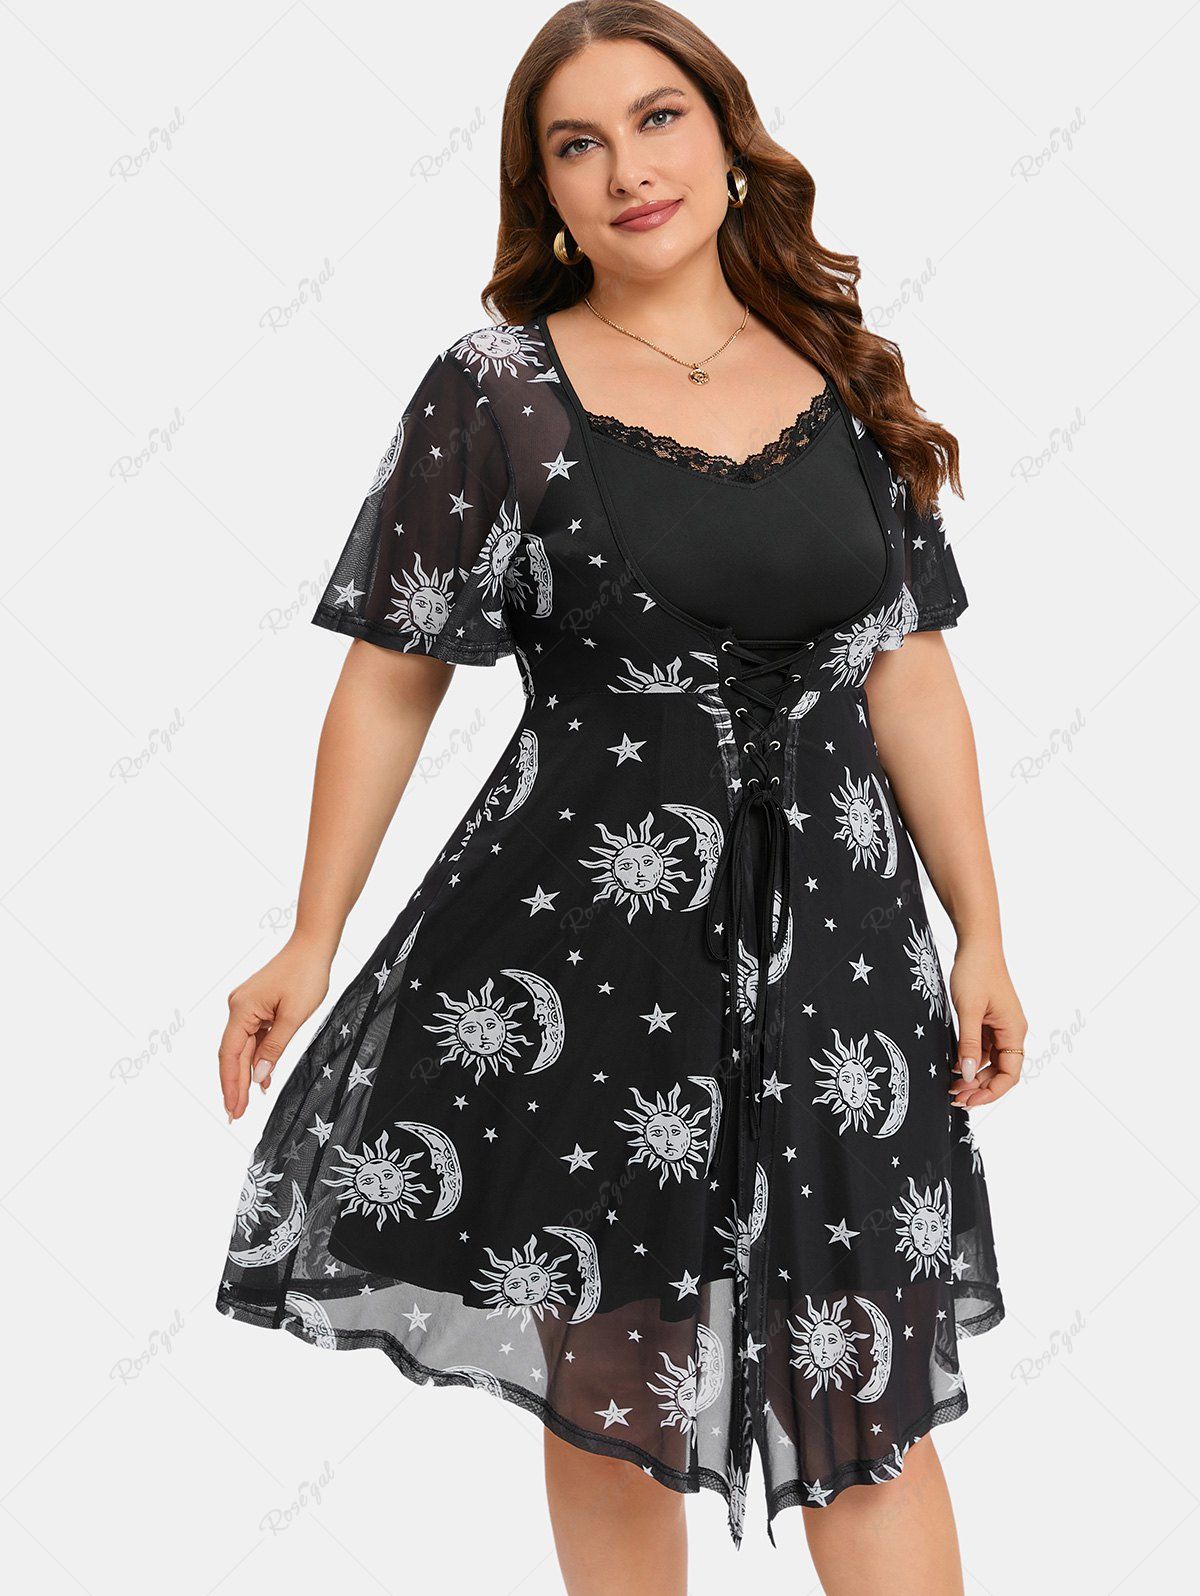 Chic Plus Size Sun Moon Star Printed Lace-up Mesh Dress and Lace Trim Cami Dress Set  